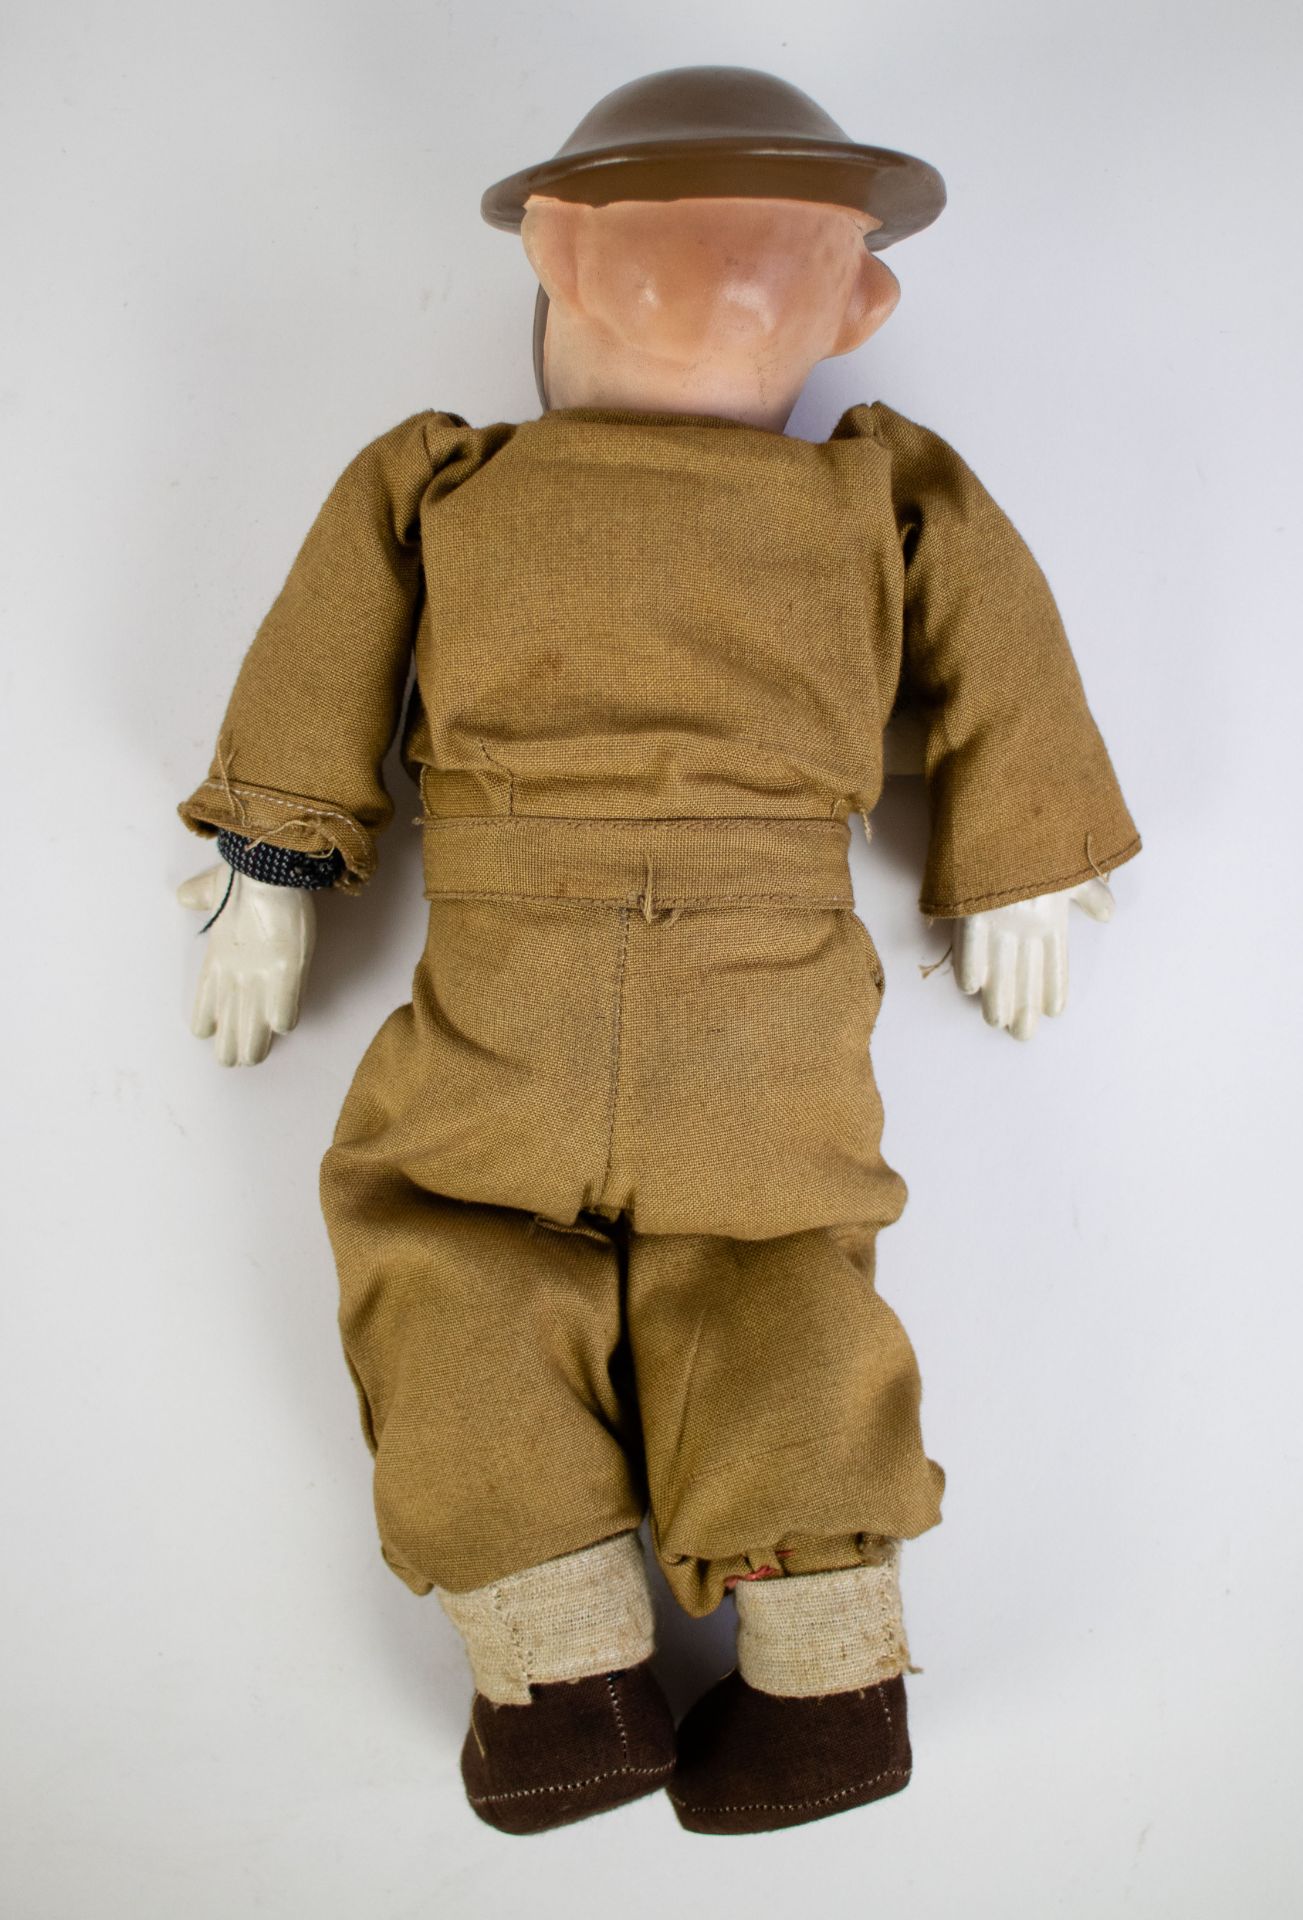 Doll Tommy UNICA Belgium - Image 3 of 3